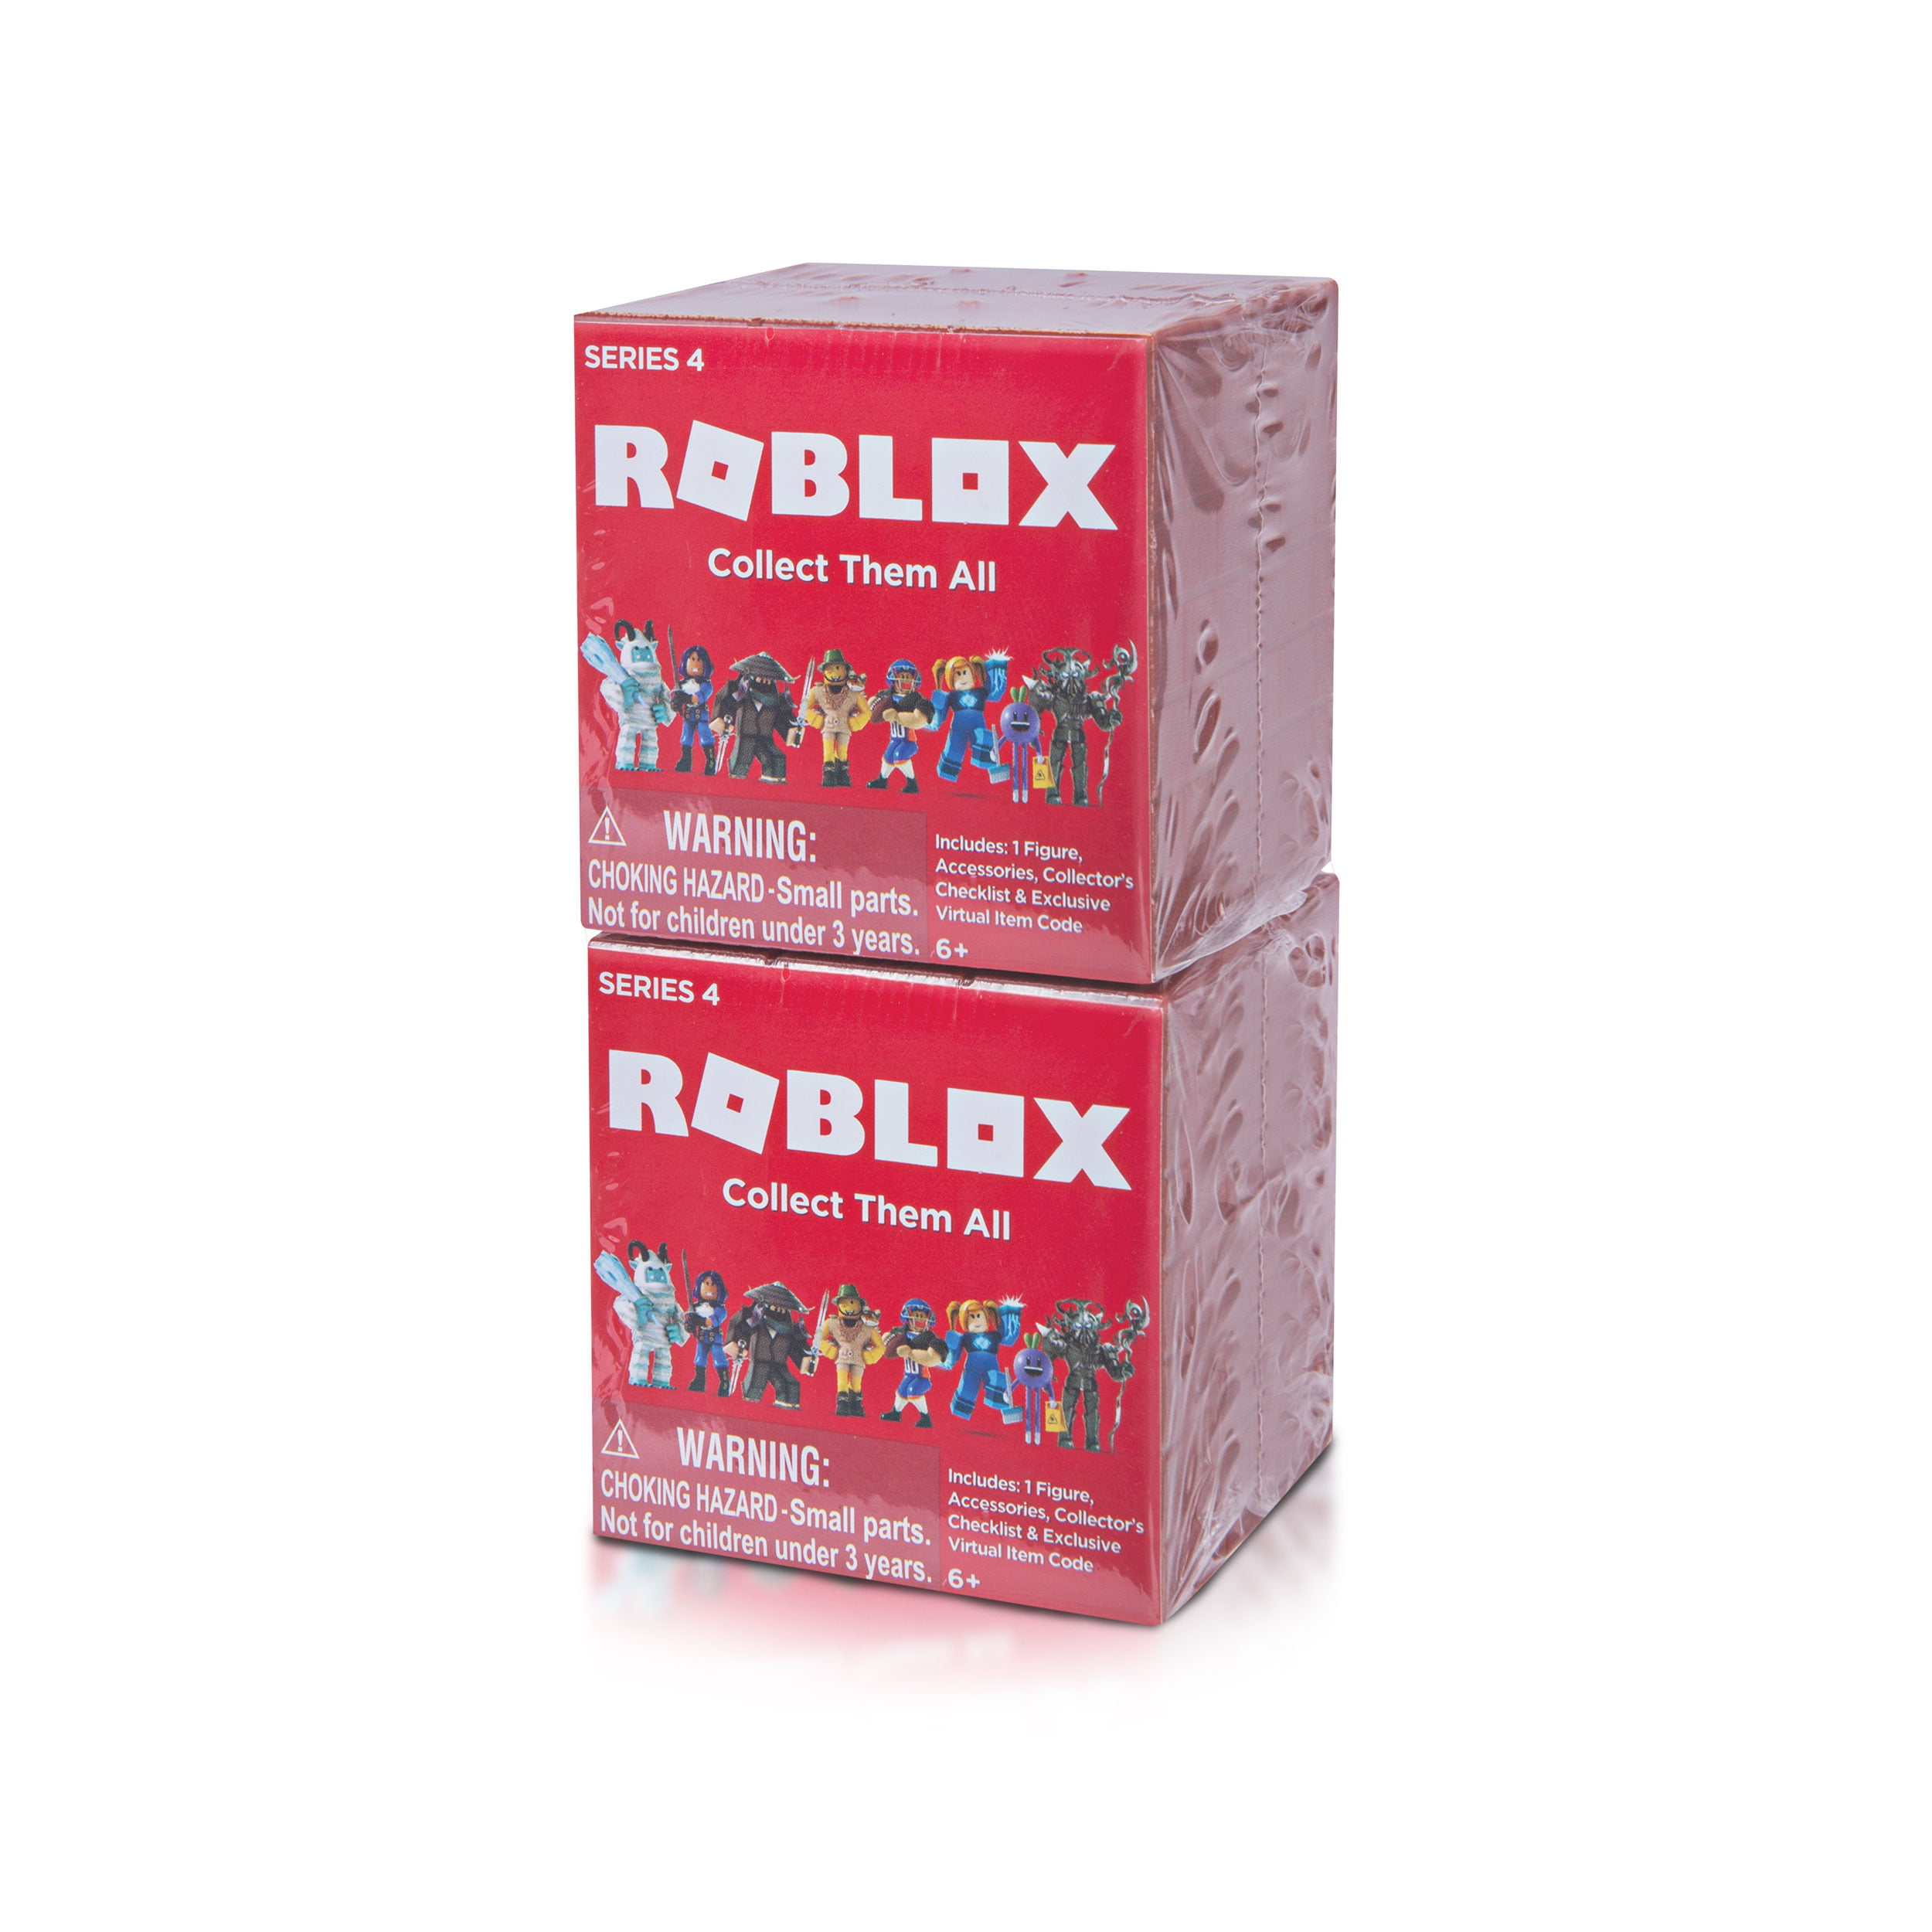 Roblox Series 1 2 3 4 Mystery Red Box Figures Kids Toys Packs Virtual Game Codes Tv Movie Video Game Action Figures Tv Action Figures - roblox series 4 codes